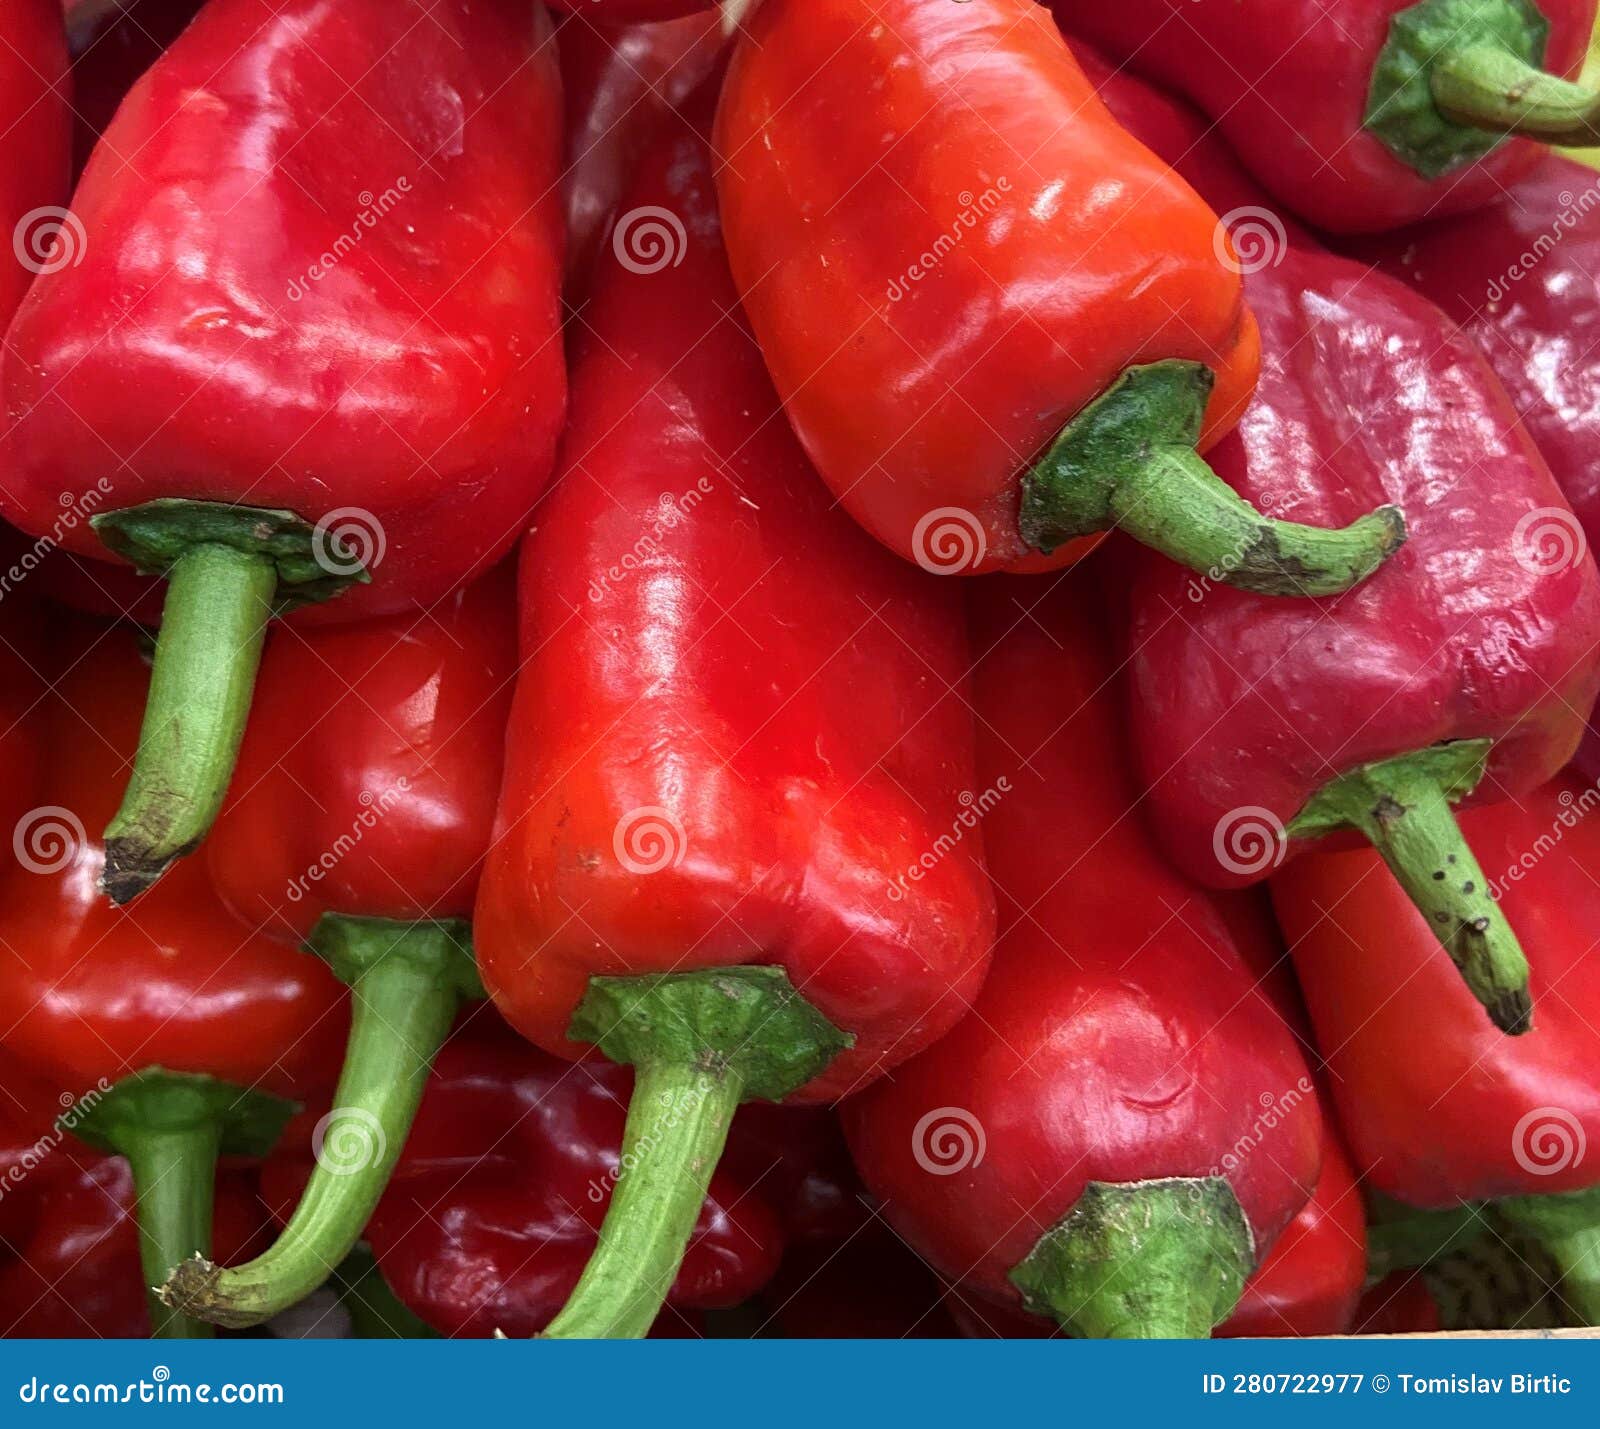 close up of ecologicaly grown red paprika